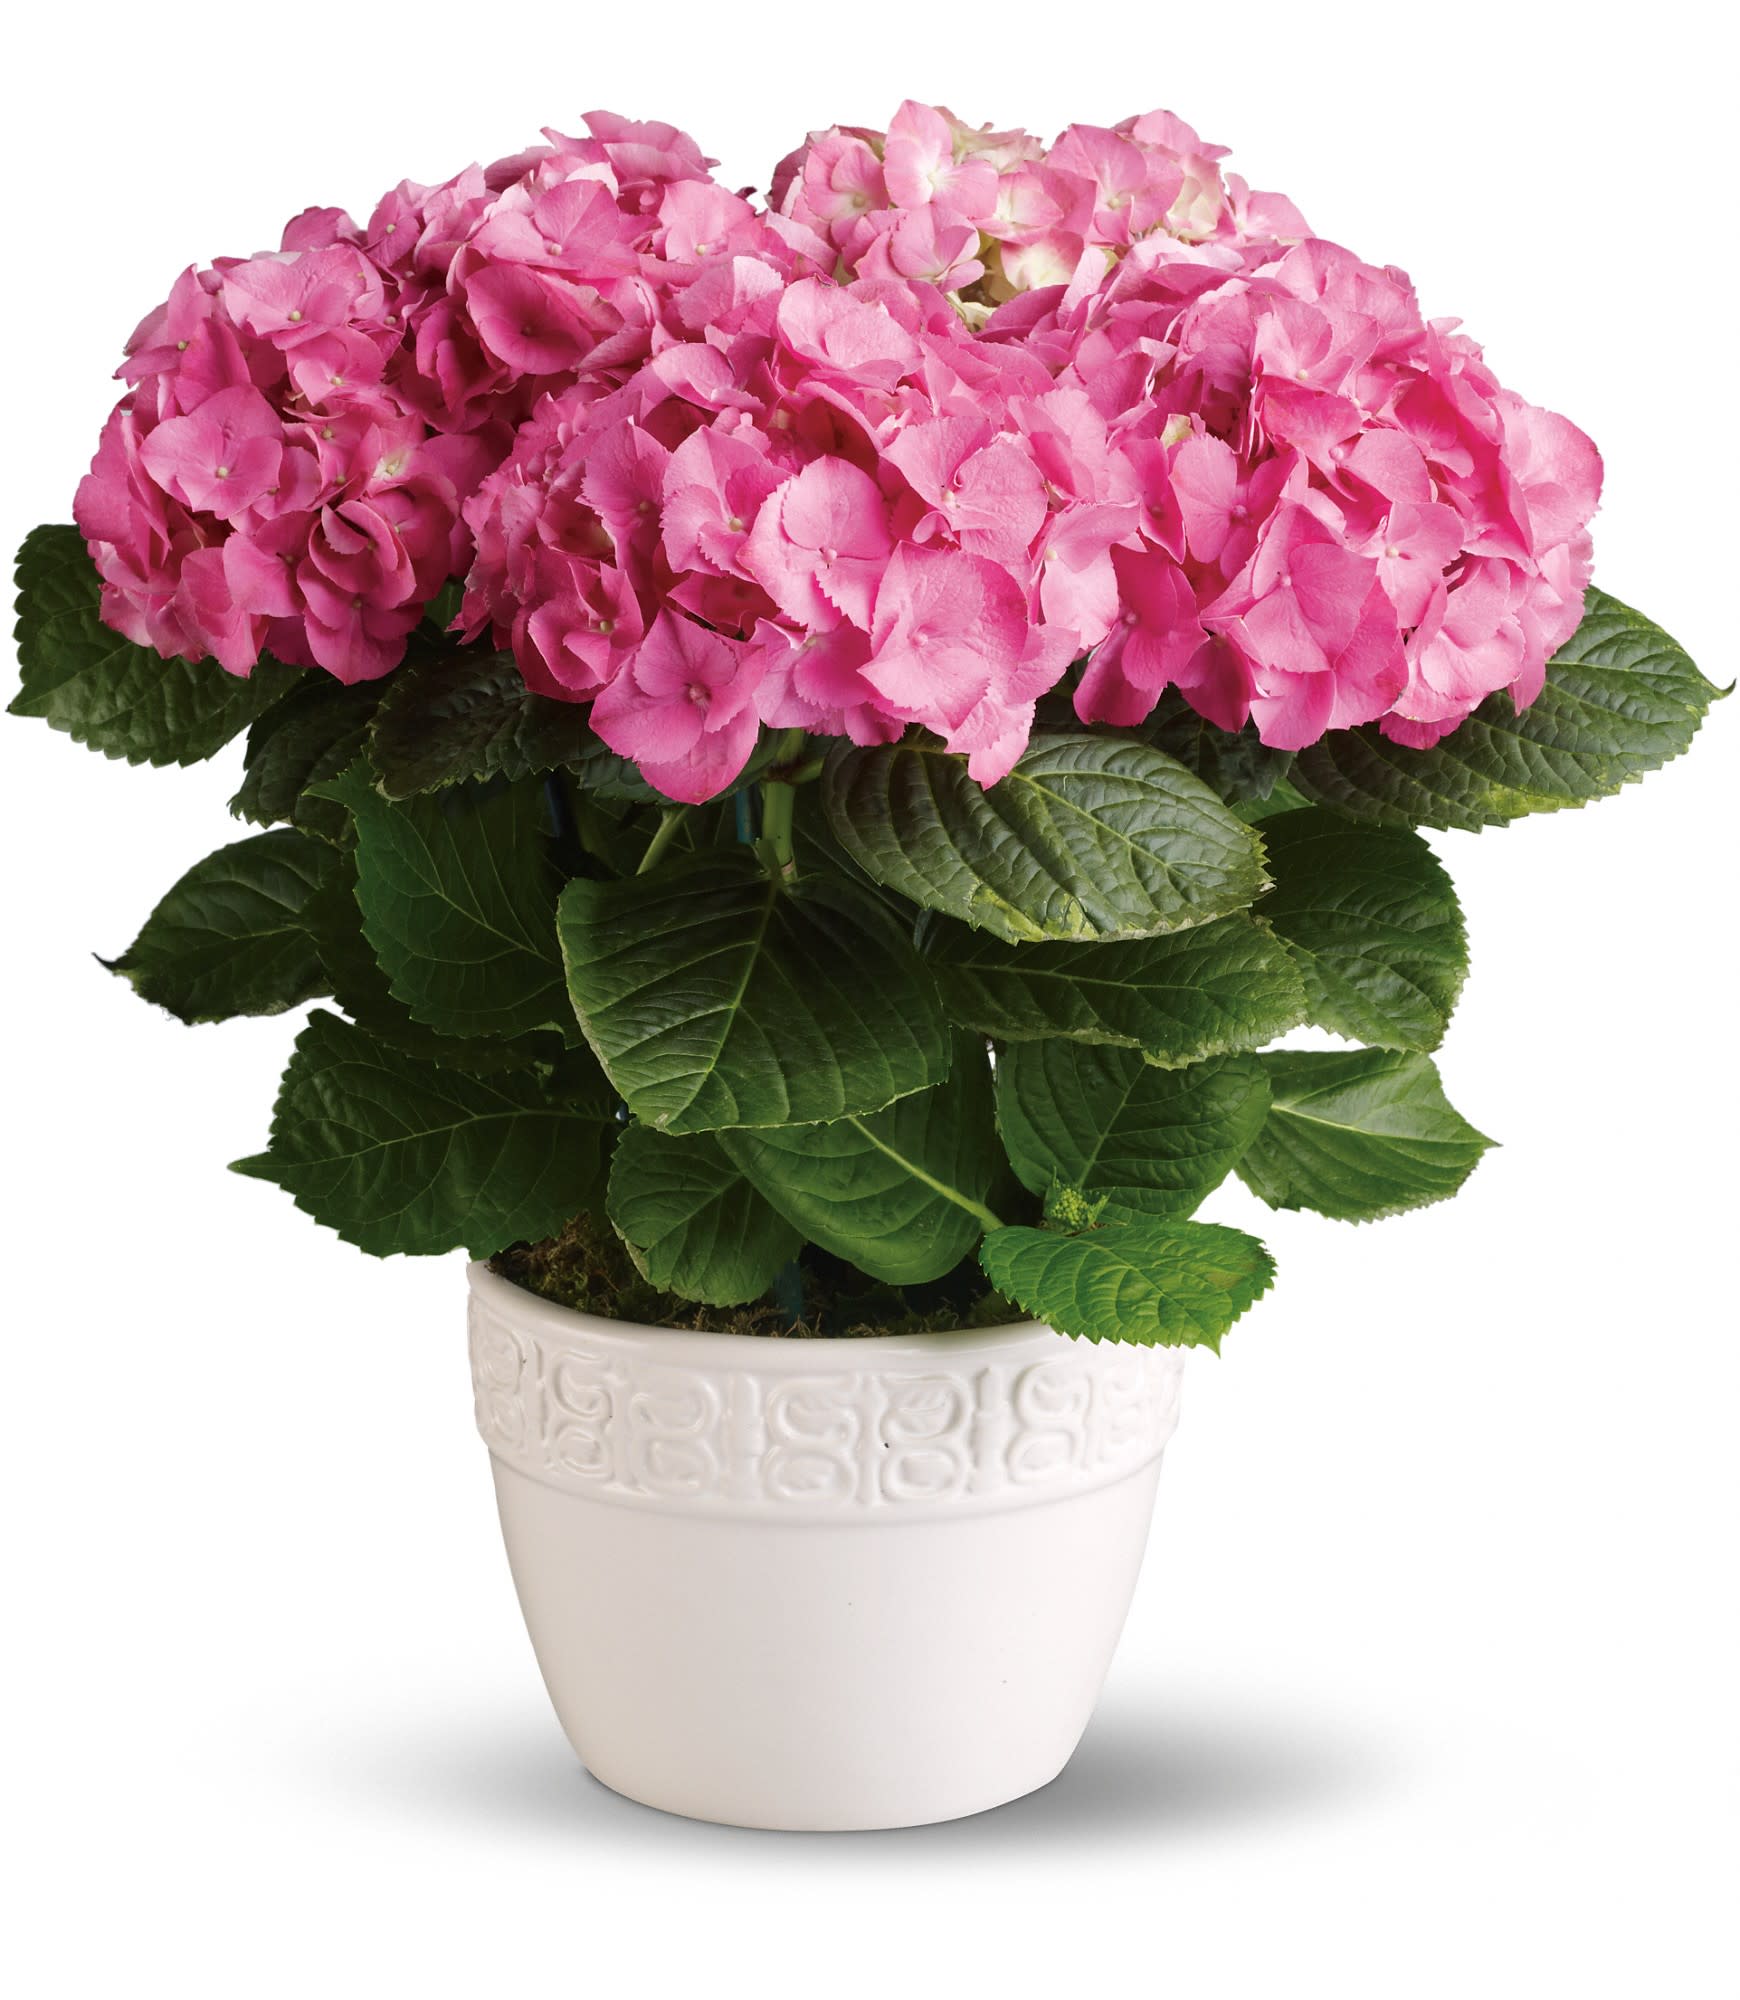 Happy Hydrangea - Pink - Big, beautiful blossoms of pretty petals make the pink hydrangea a popular gift. Always appreciated, this versatile selection is perfect for a birthday, housewarming, thank-youâ¦whatever. Beautiful to look at and easy to grow, no wonder it's America's darling.  A lovely pink hydrangea is delivered in a fresh white ceramic pot. Simply charming!  Approximately 18&quot; W x 18&quot; H  Orientation: N/A  As Shown : T89-1A